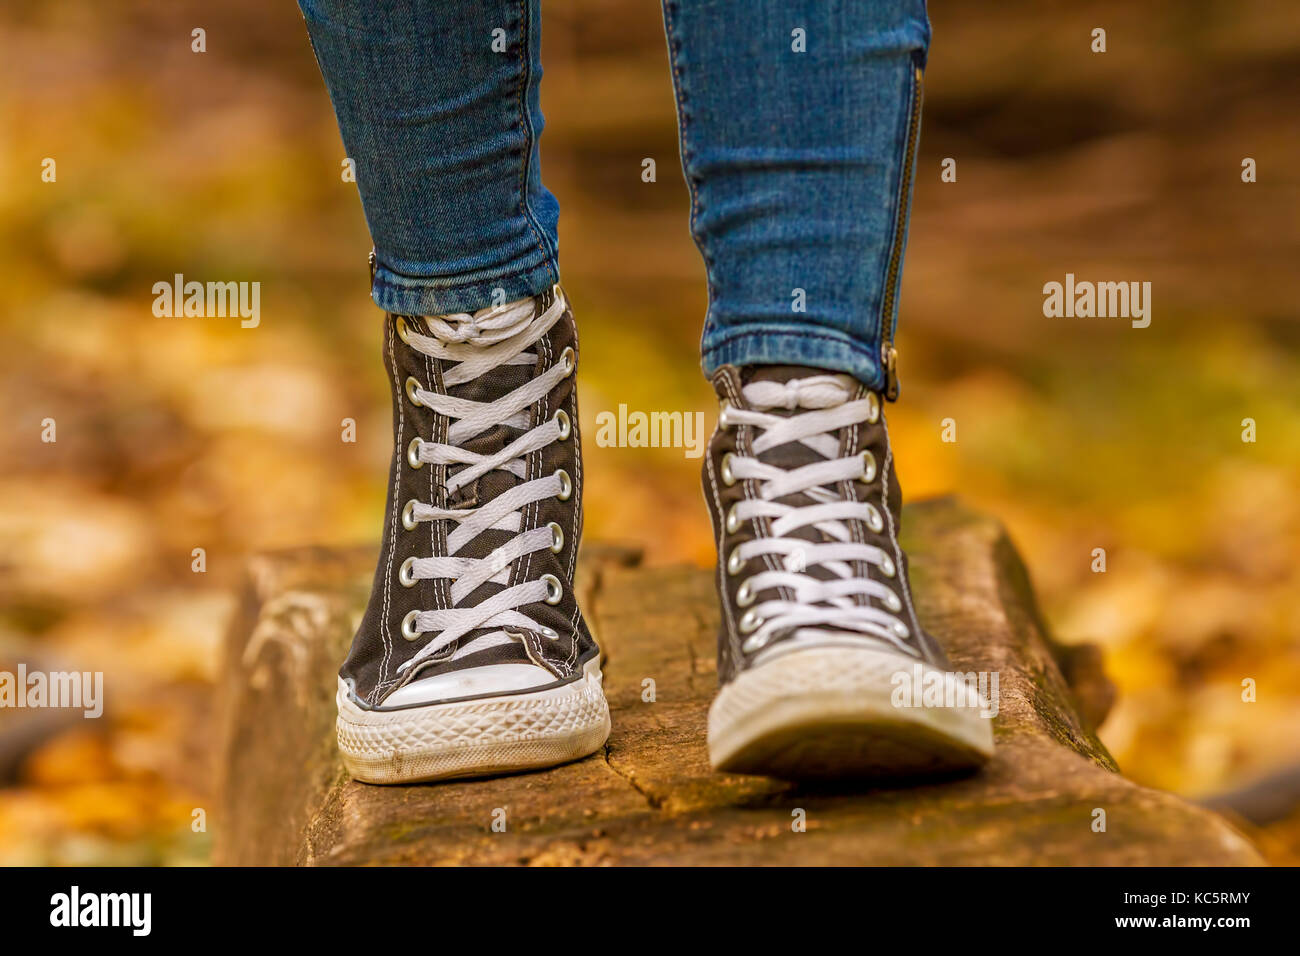 Teenage girl wears with black sneakers walking on wood over fall leaves in the autumn season. Stock Photo